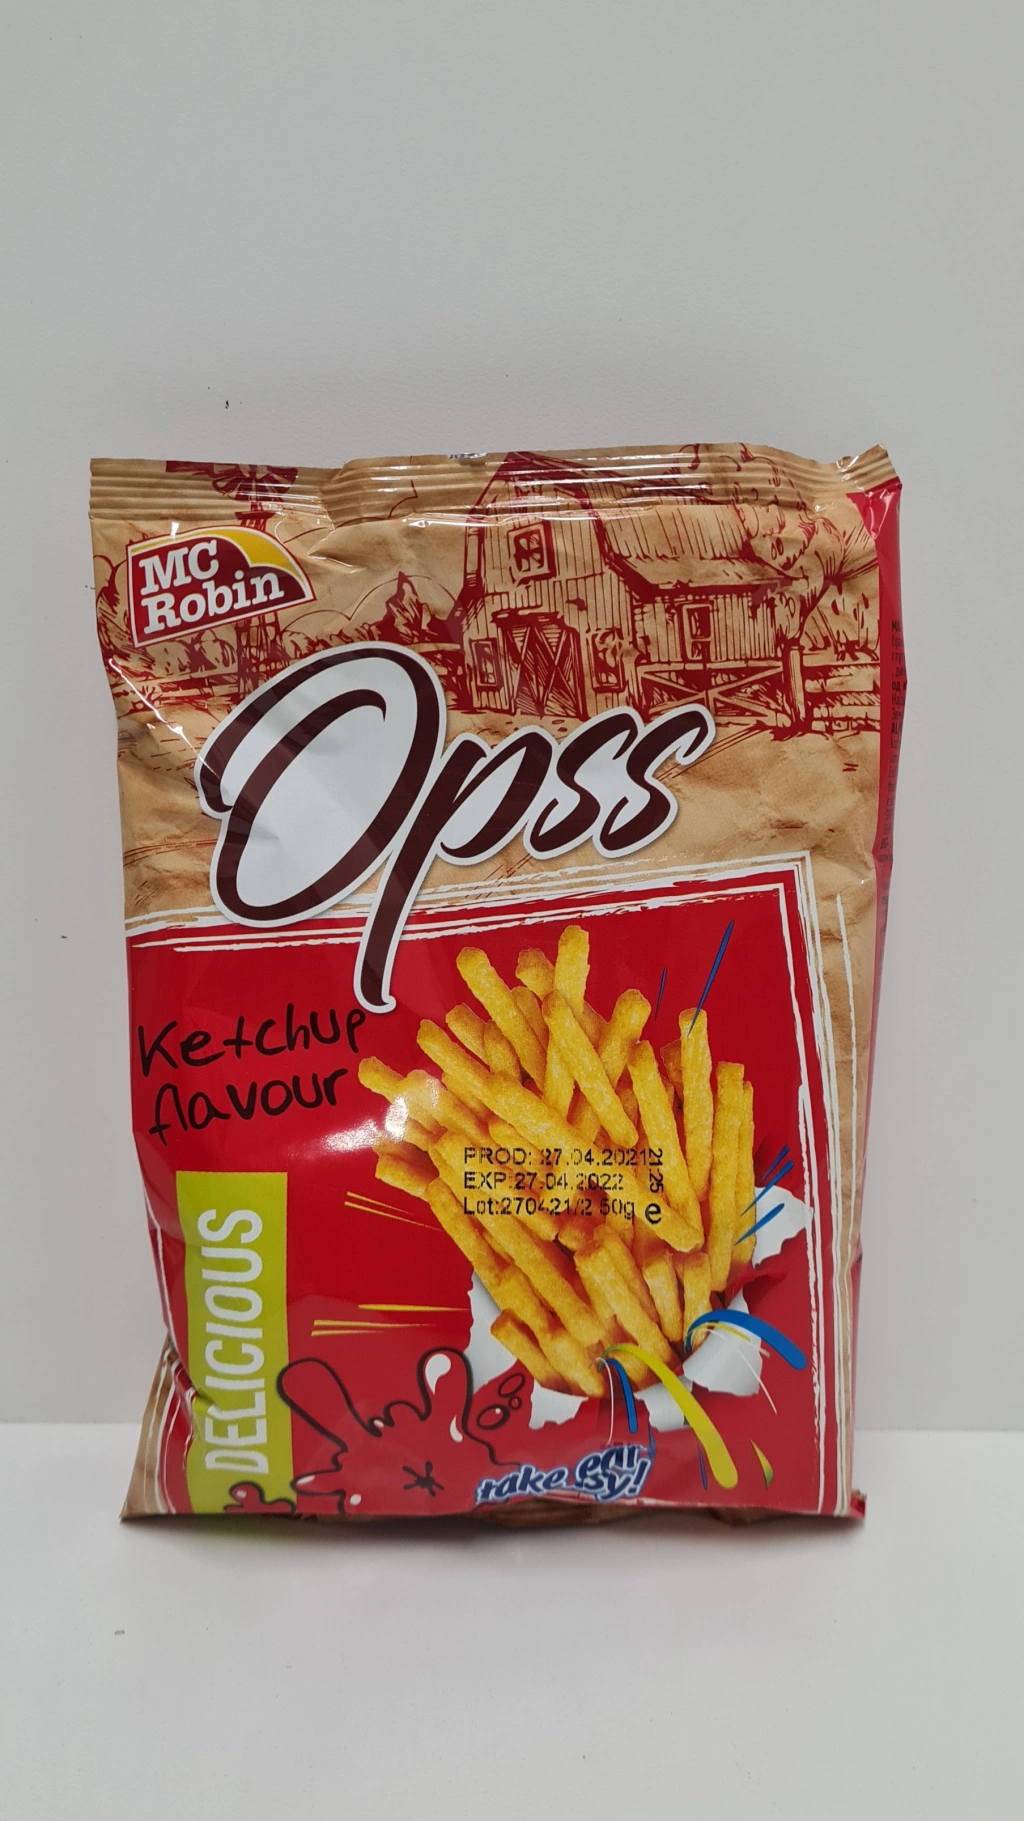 Fries with ketchup Opss - 32 pcs.